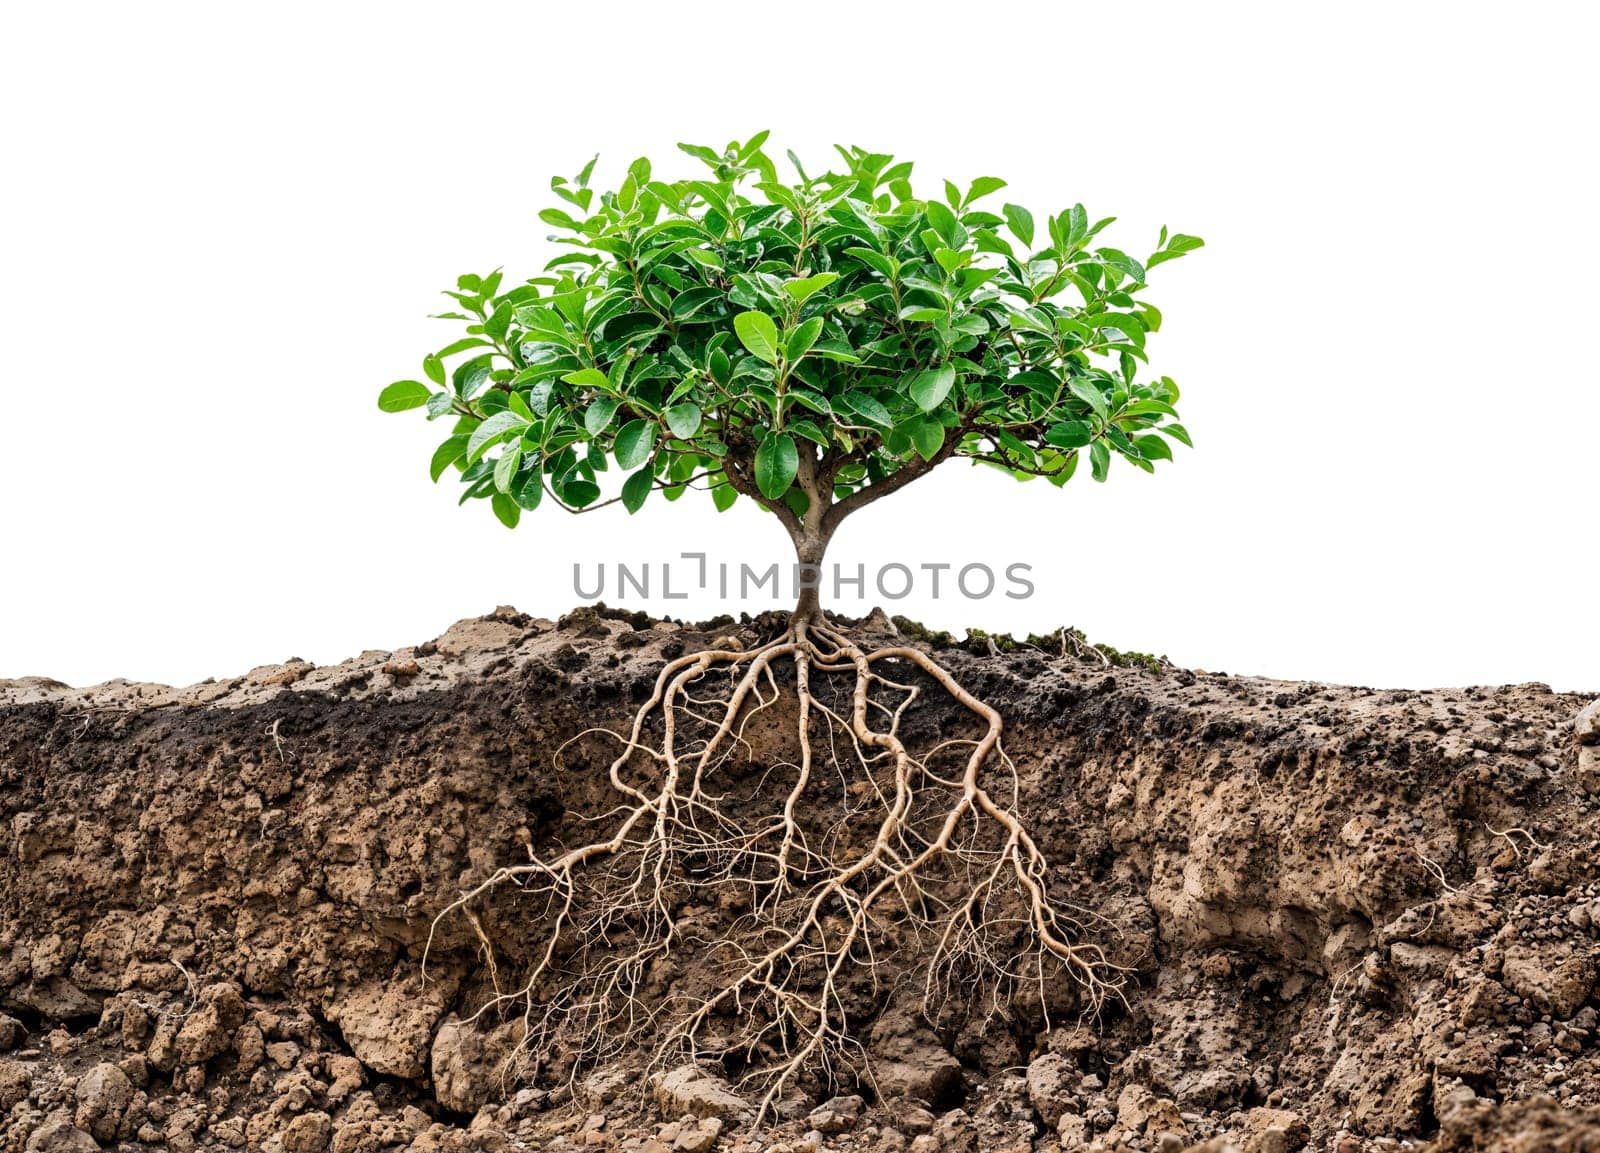 A detailed image of small tree with root system growing underground